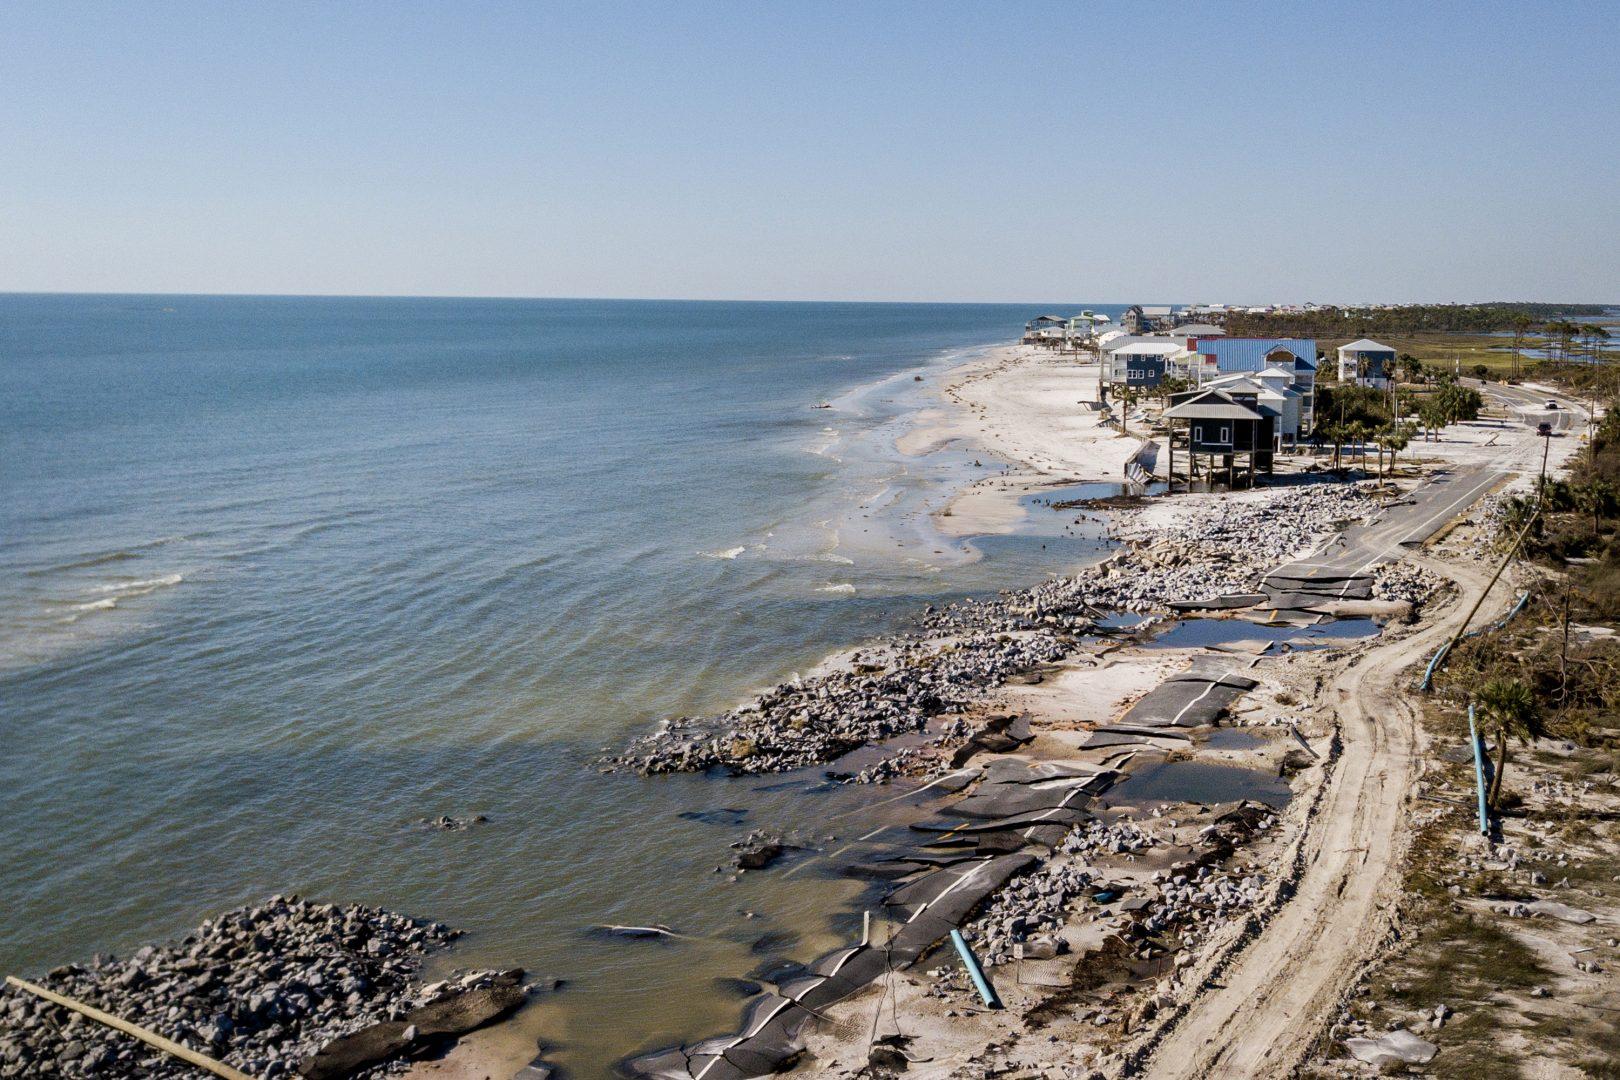 A broken road leads into Cape San Blas on Saturday, Oct. 13, 2018. The town was damaged by Hurricane Michael when it made landfall on Oct. 10. (Bronte Wittpenn/Tribune News Service)